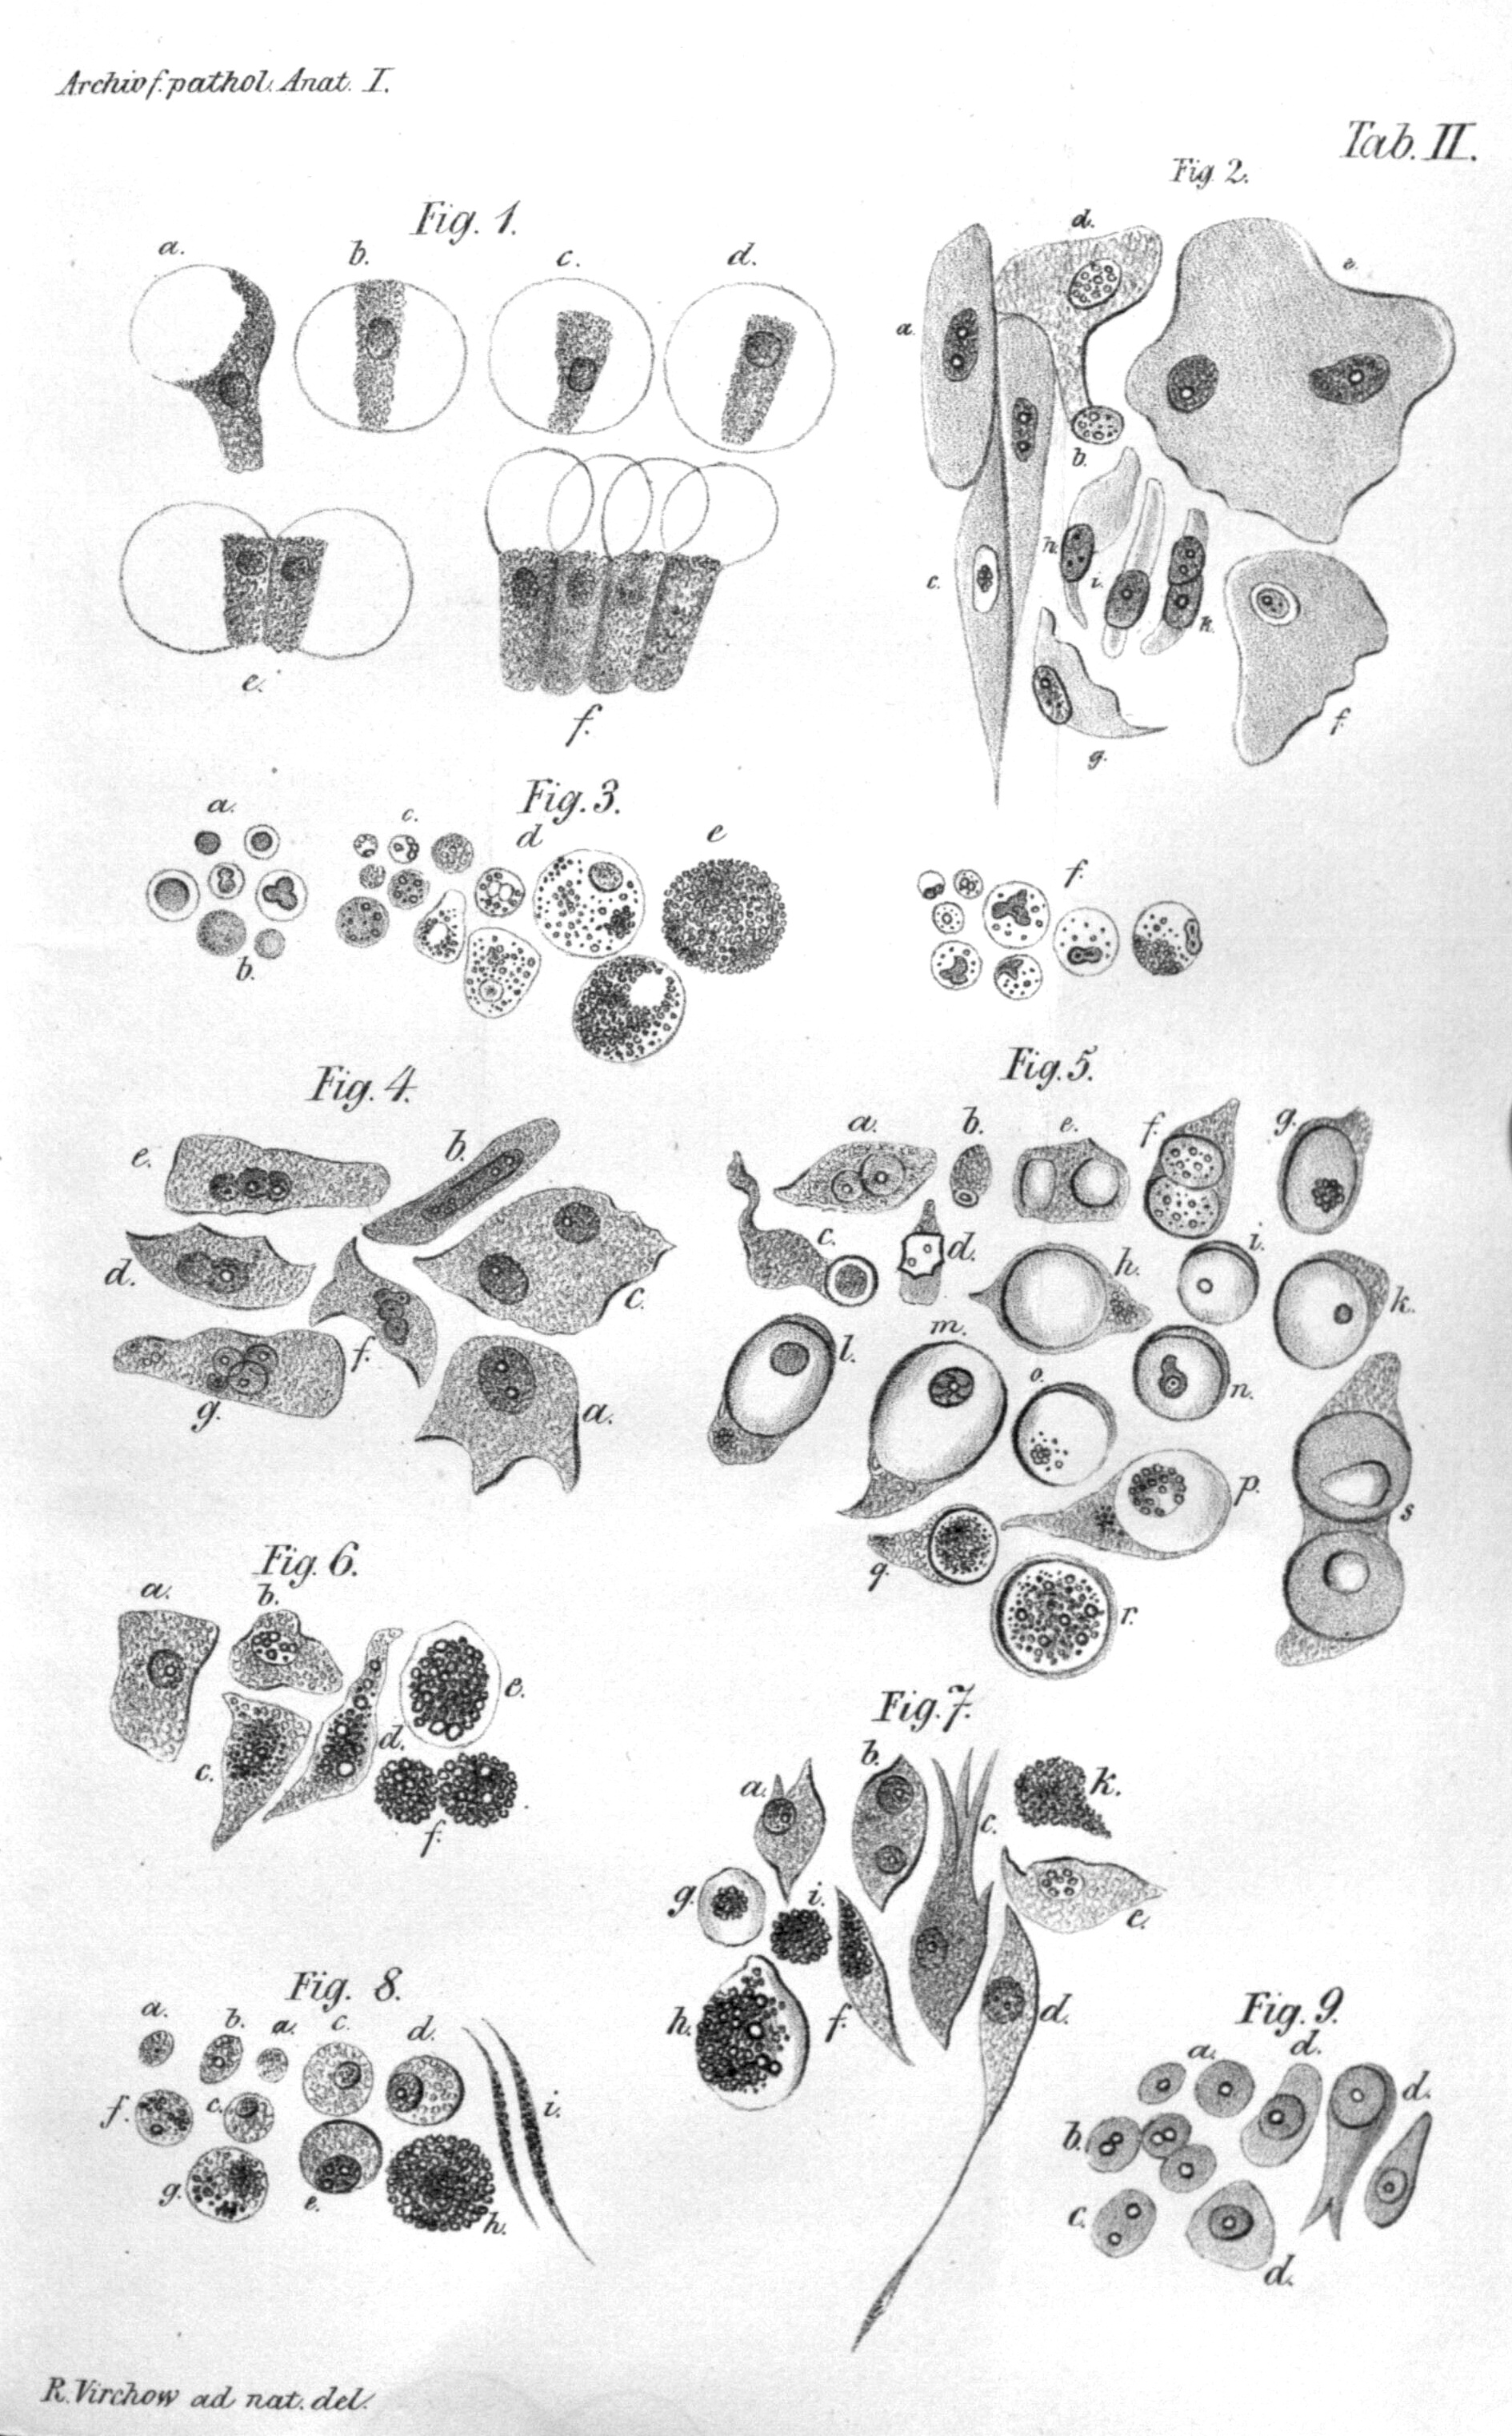 Illustration of Virchow’s cell theory. Virchow depicted different cells transformation due to irritation. (Virchow Rudolf 1847)